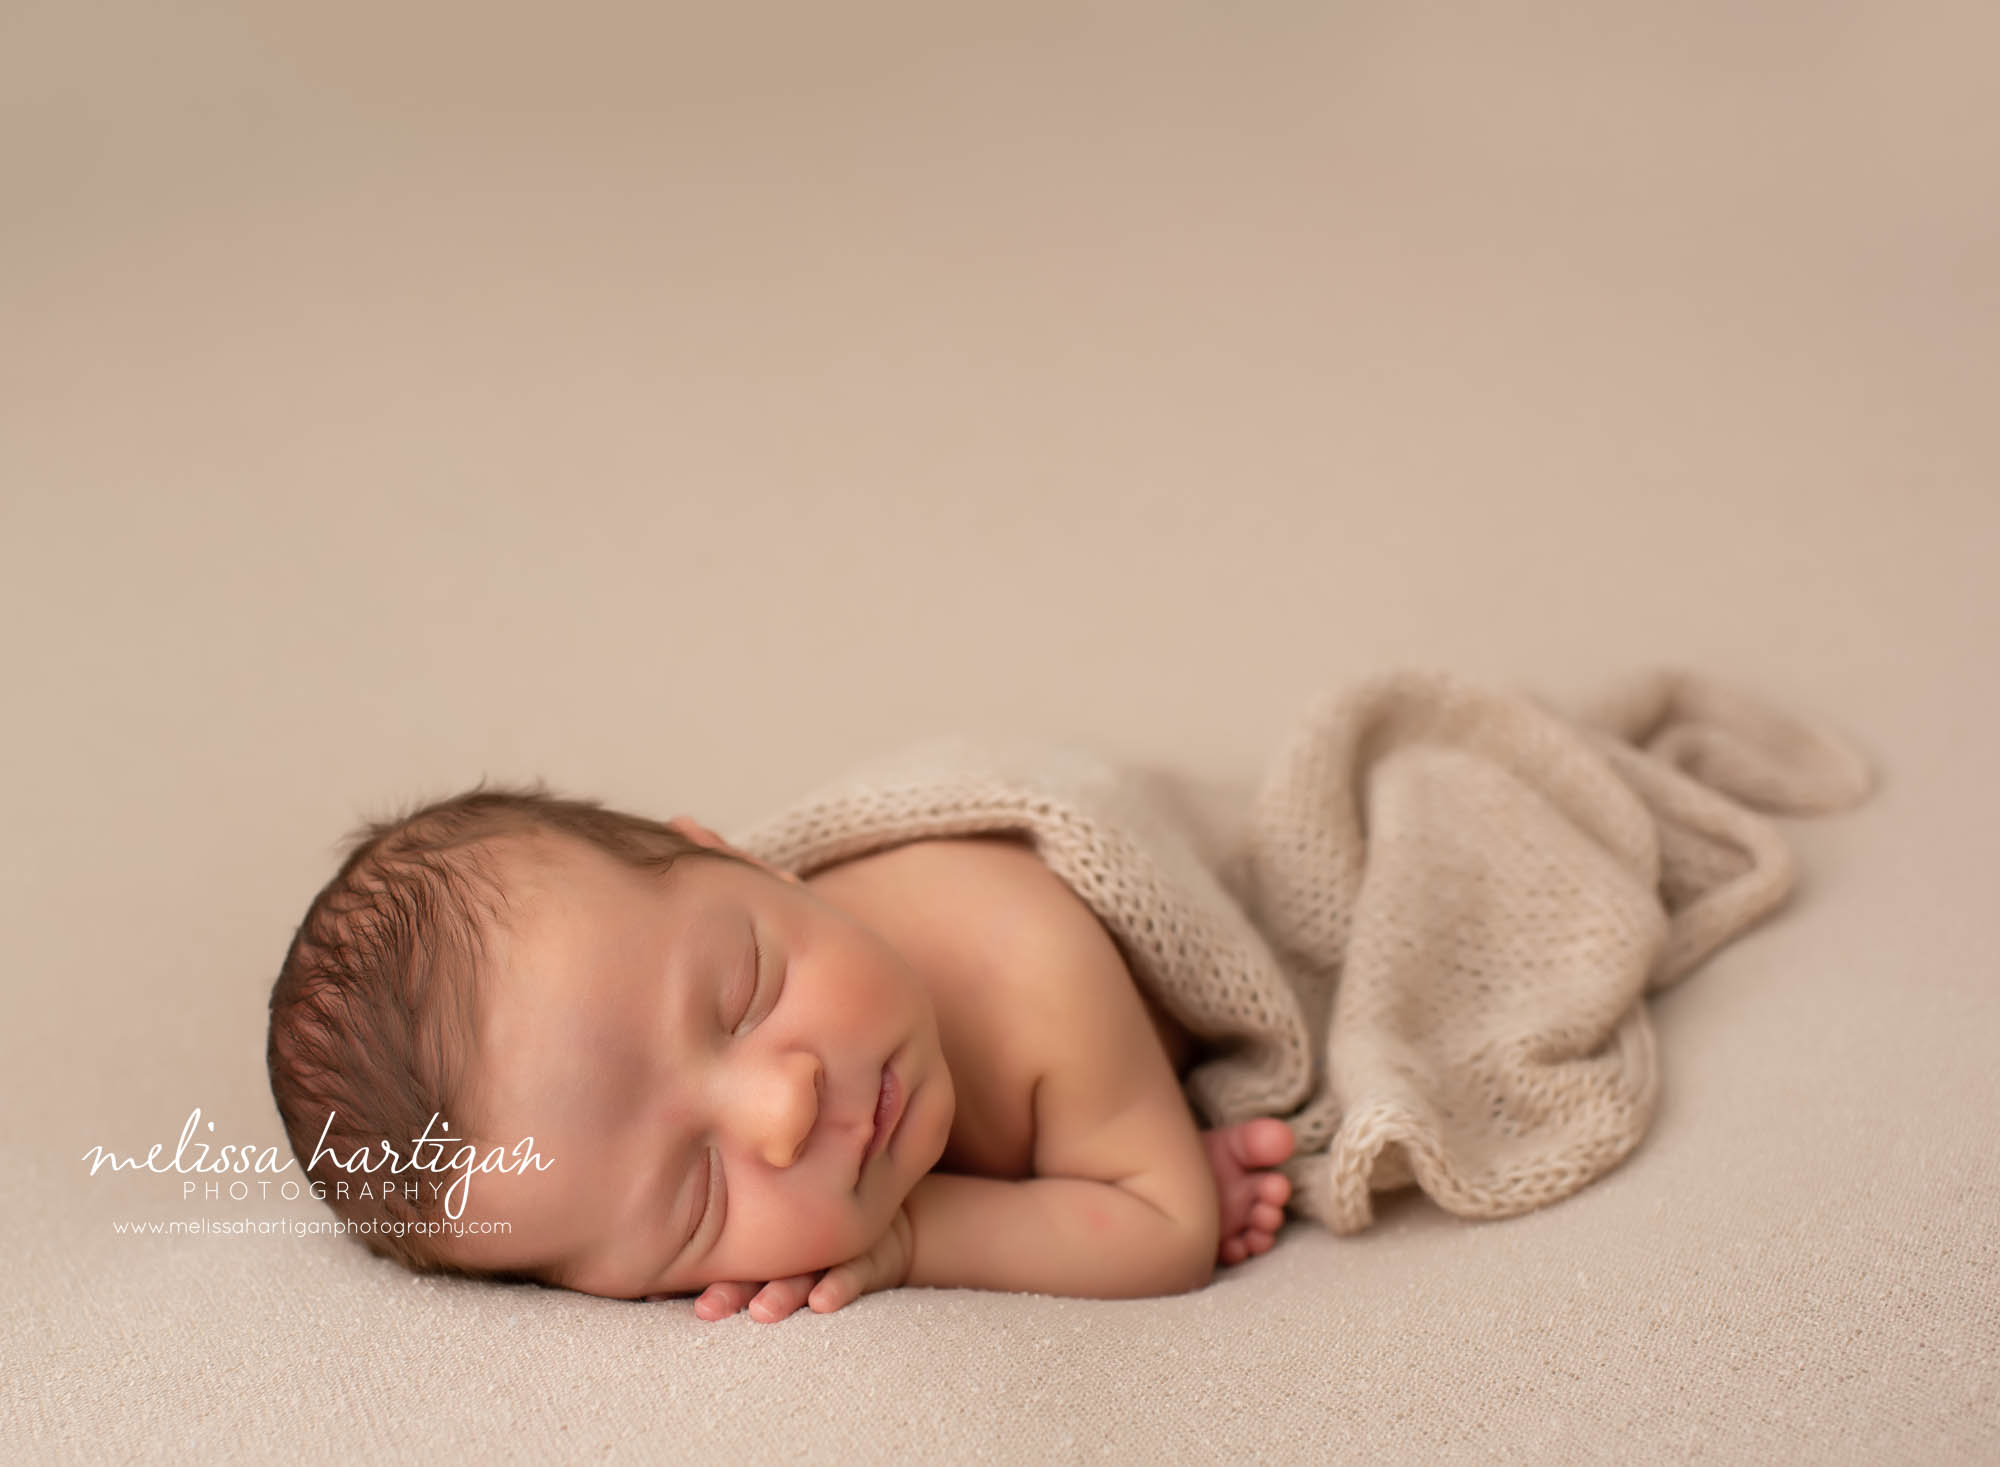 Baby boy posed on tummy with hand under cheek and toes peeking out with wrap lightly laying over him on tan colored backdrop newborn baby boy sleeping newborn photography session CT newborn photographers studio